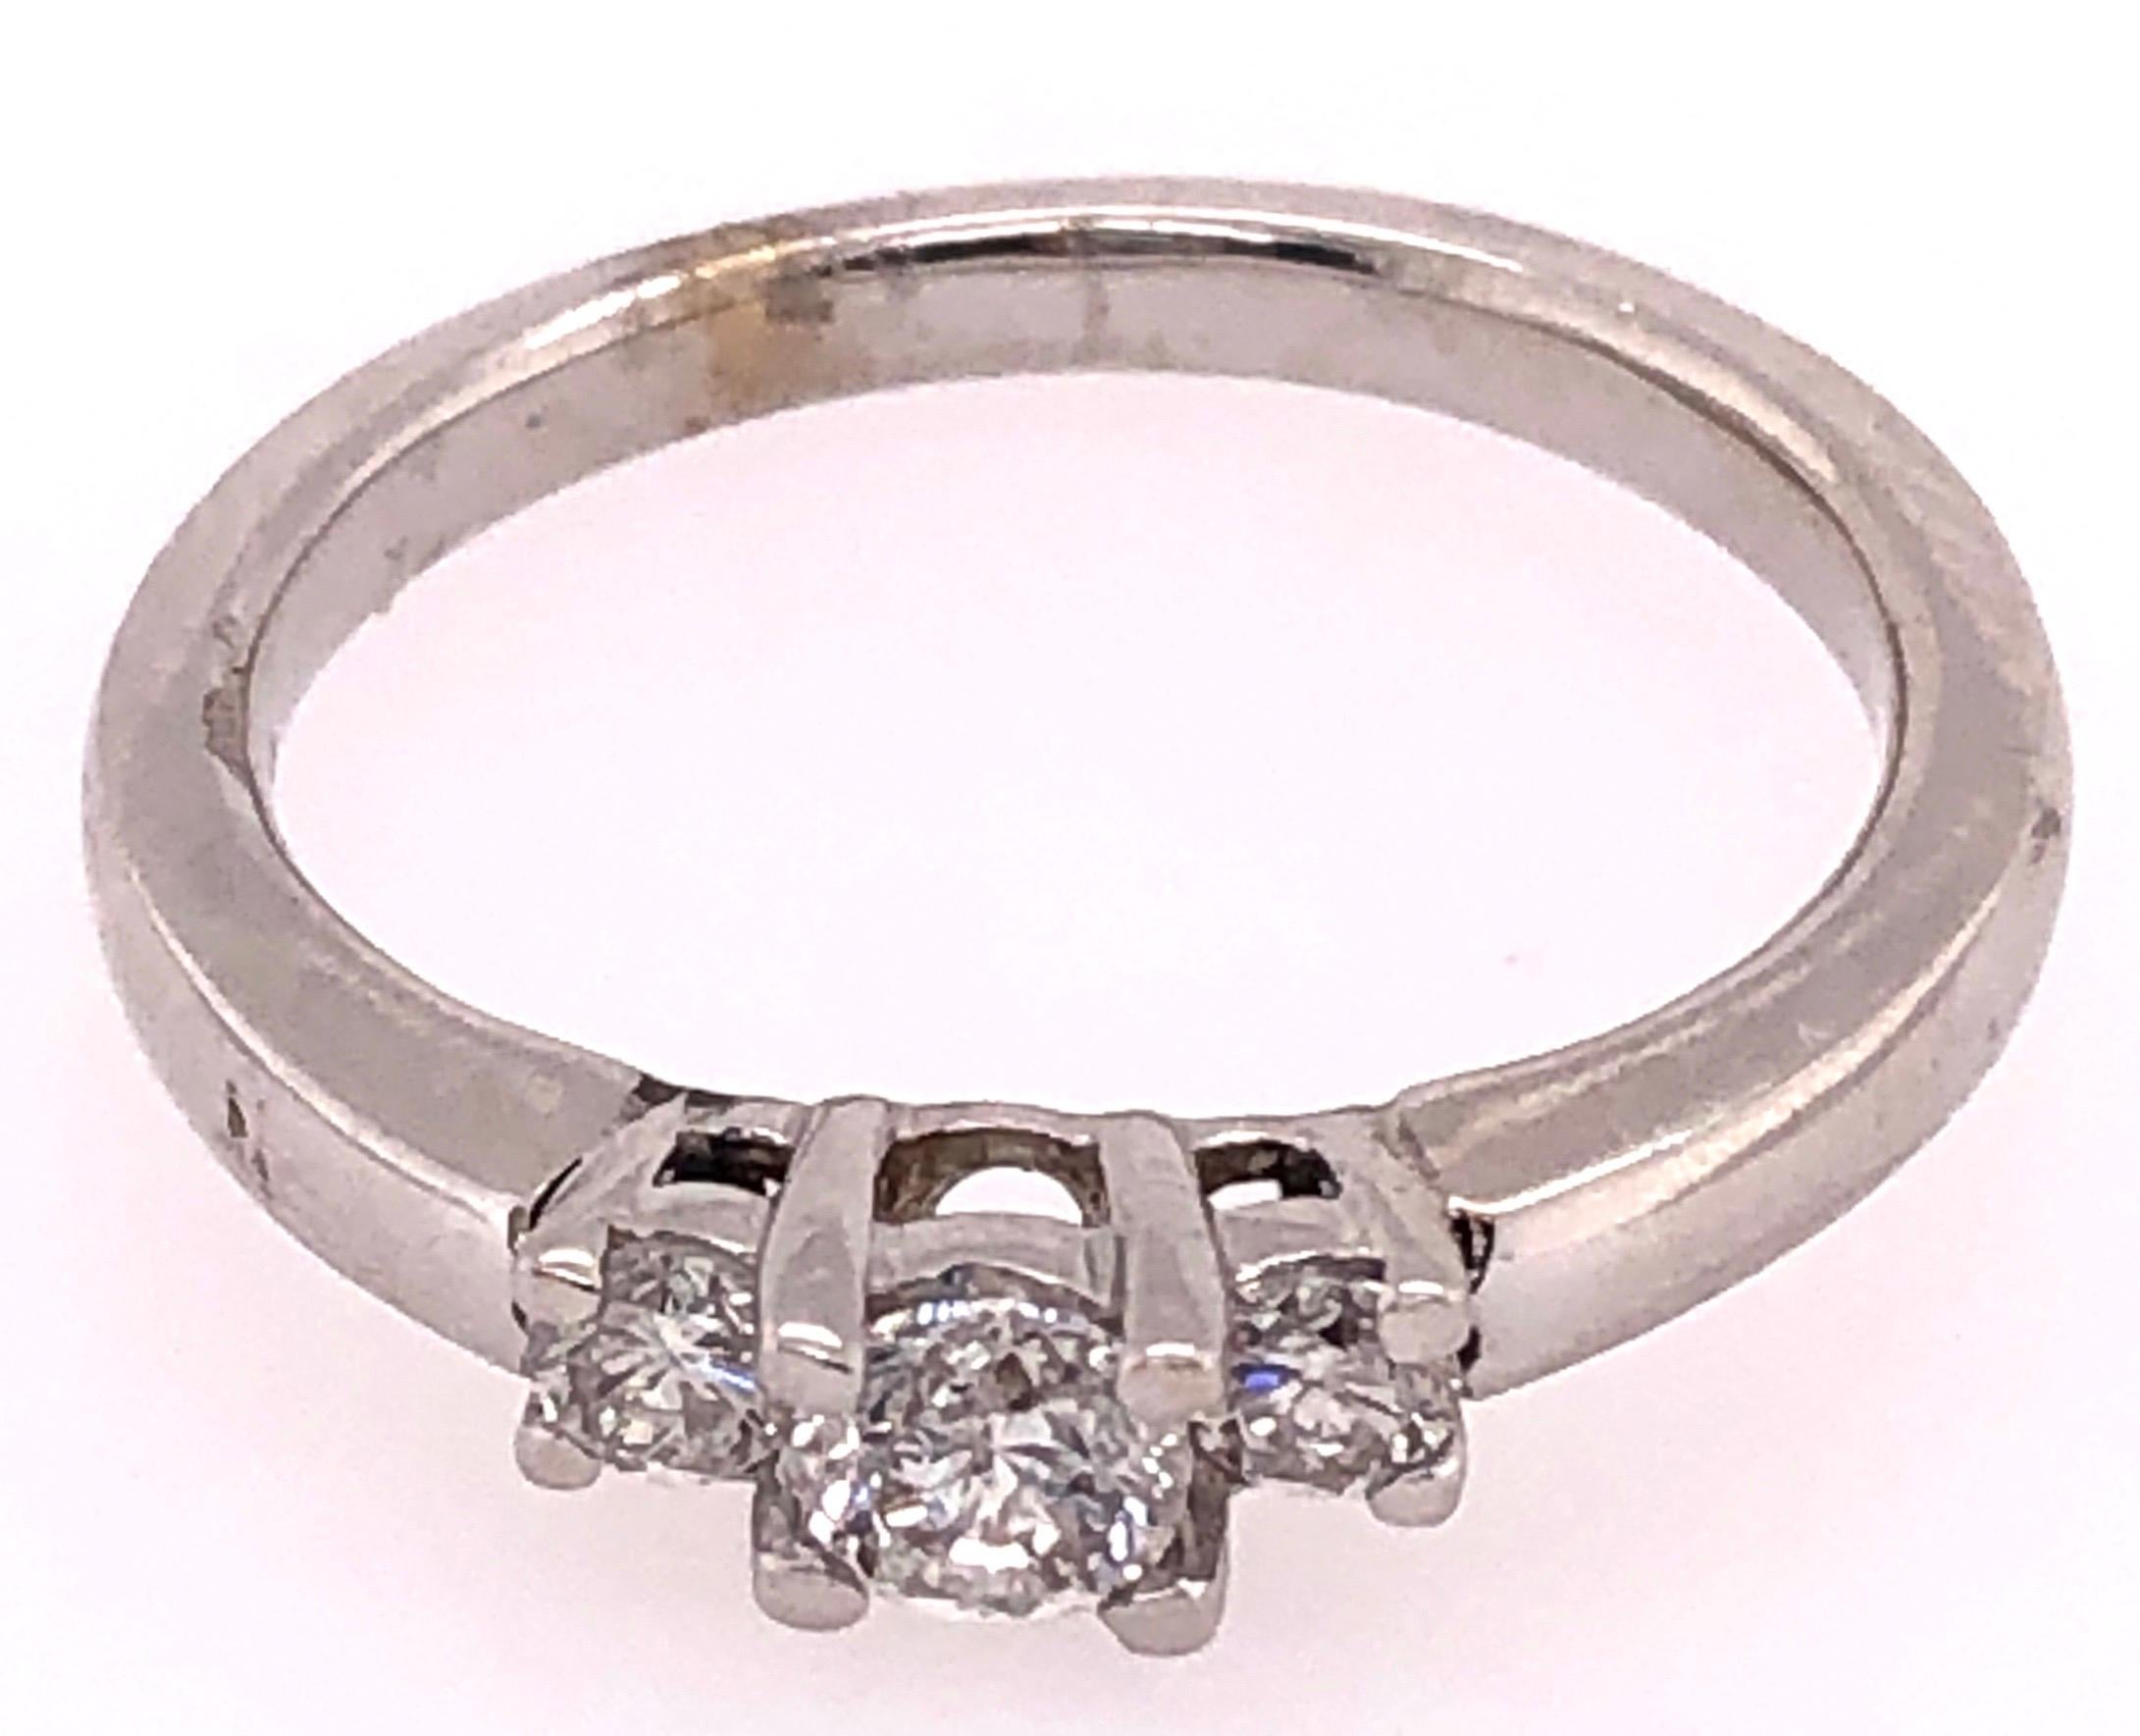 14Kt White Gold Engagement Ring/Band Ring 0.50 Total Diamond Weight
Size 6.75 with 3.7 grams Total Weight.